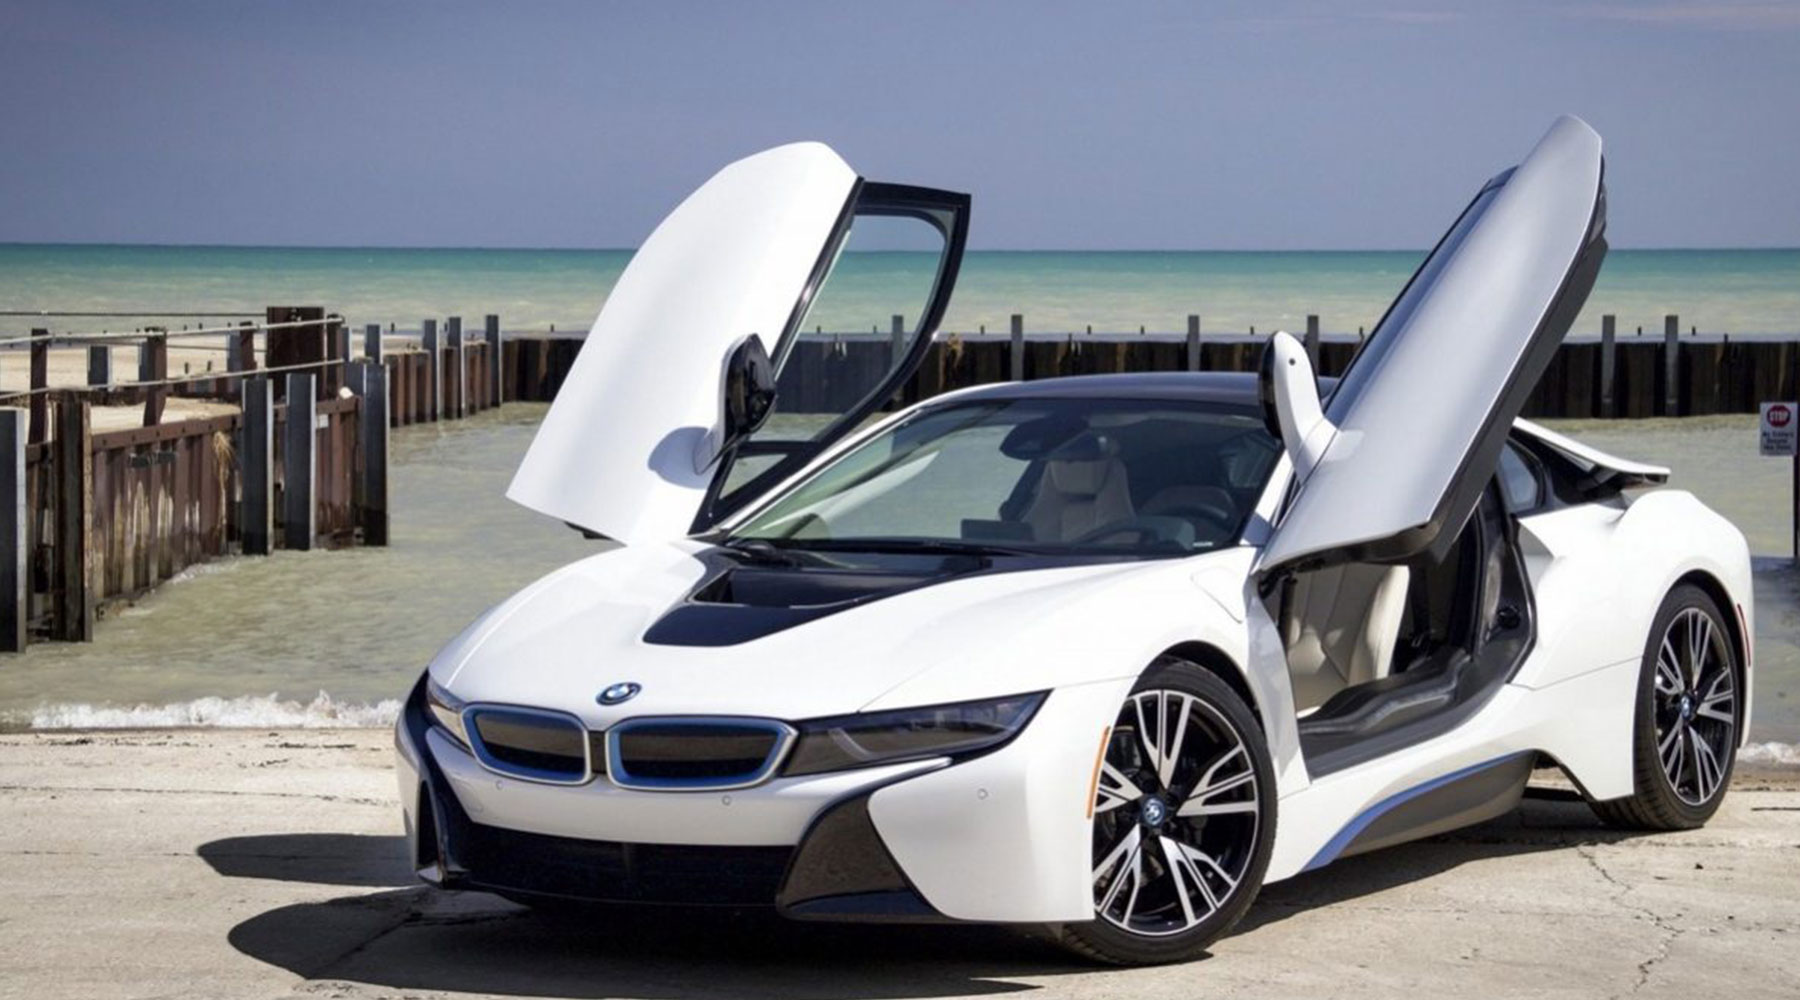 BMW I8 For Rent in Las Vegas